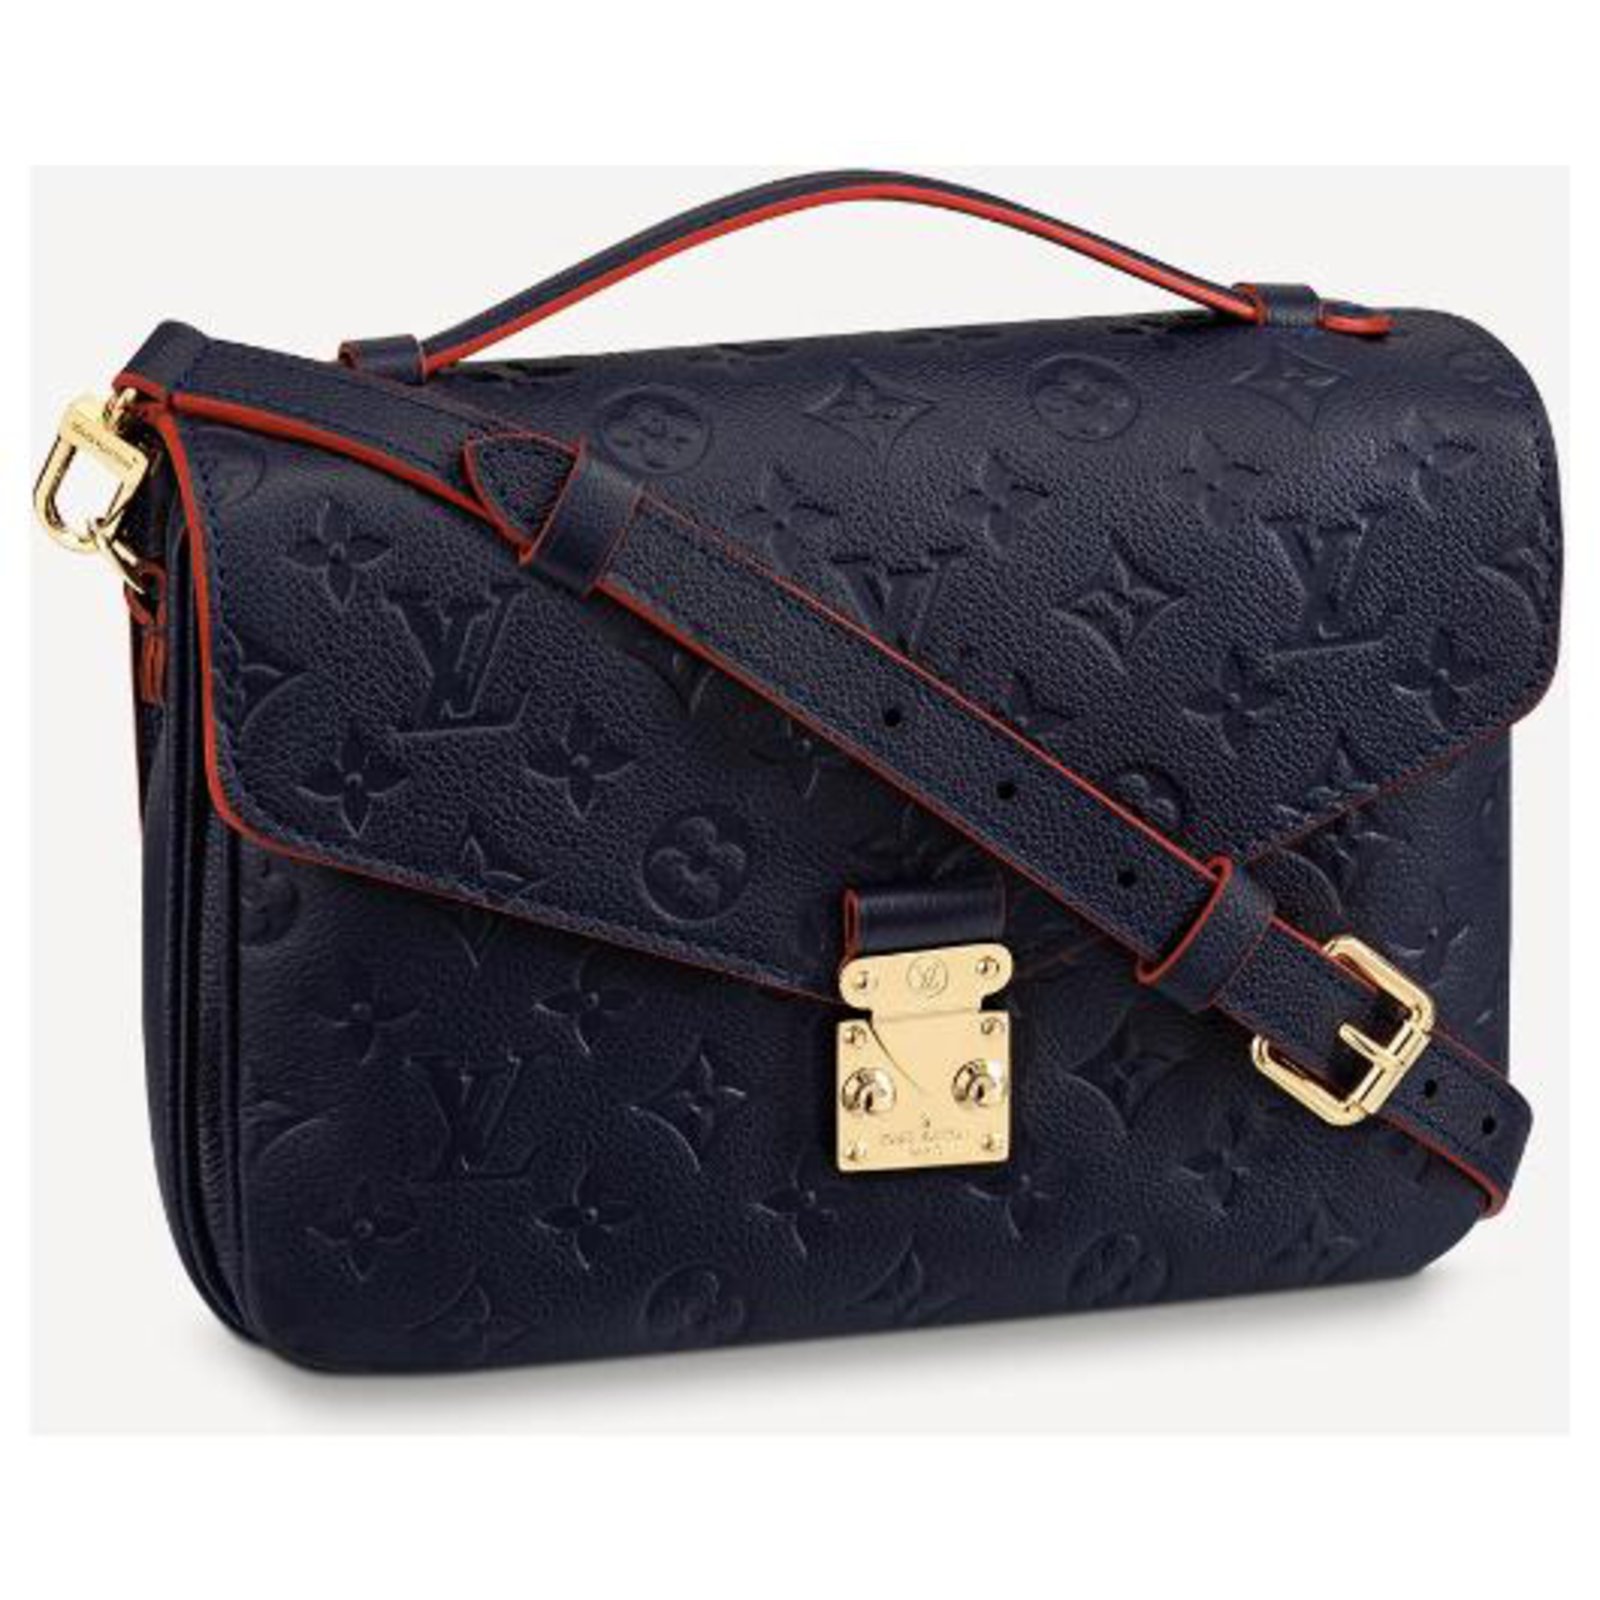 navy and red louis vuitton bag